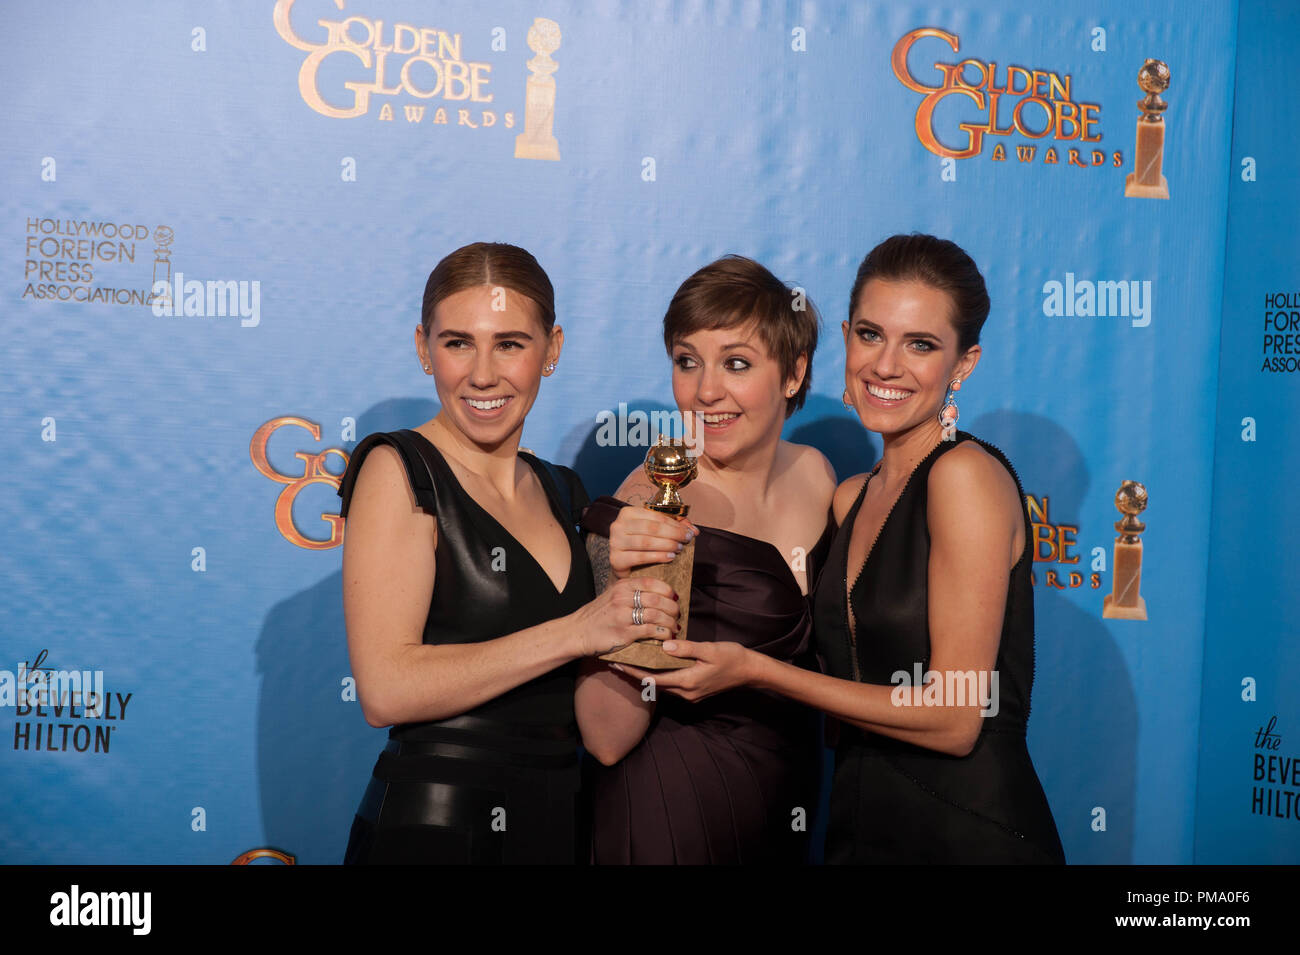 For BEST TELEVISION SERIES – COMEDY OR MUSICAL, the Golden Globe is awarded to “GIRLS” (HBO), produced by Apatow Productions and I am Jenni Konner Productions in association with HBO Entertainment. Zosia Mamet, Lena Dunham, and Allison Williams pose with the award backstage in the press room at the 70th Annual Golden Globe Awards at the Beverly Hilton in Beverly Hills, CA on Sunday, January 13, 2013. Stock Photo